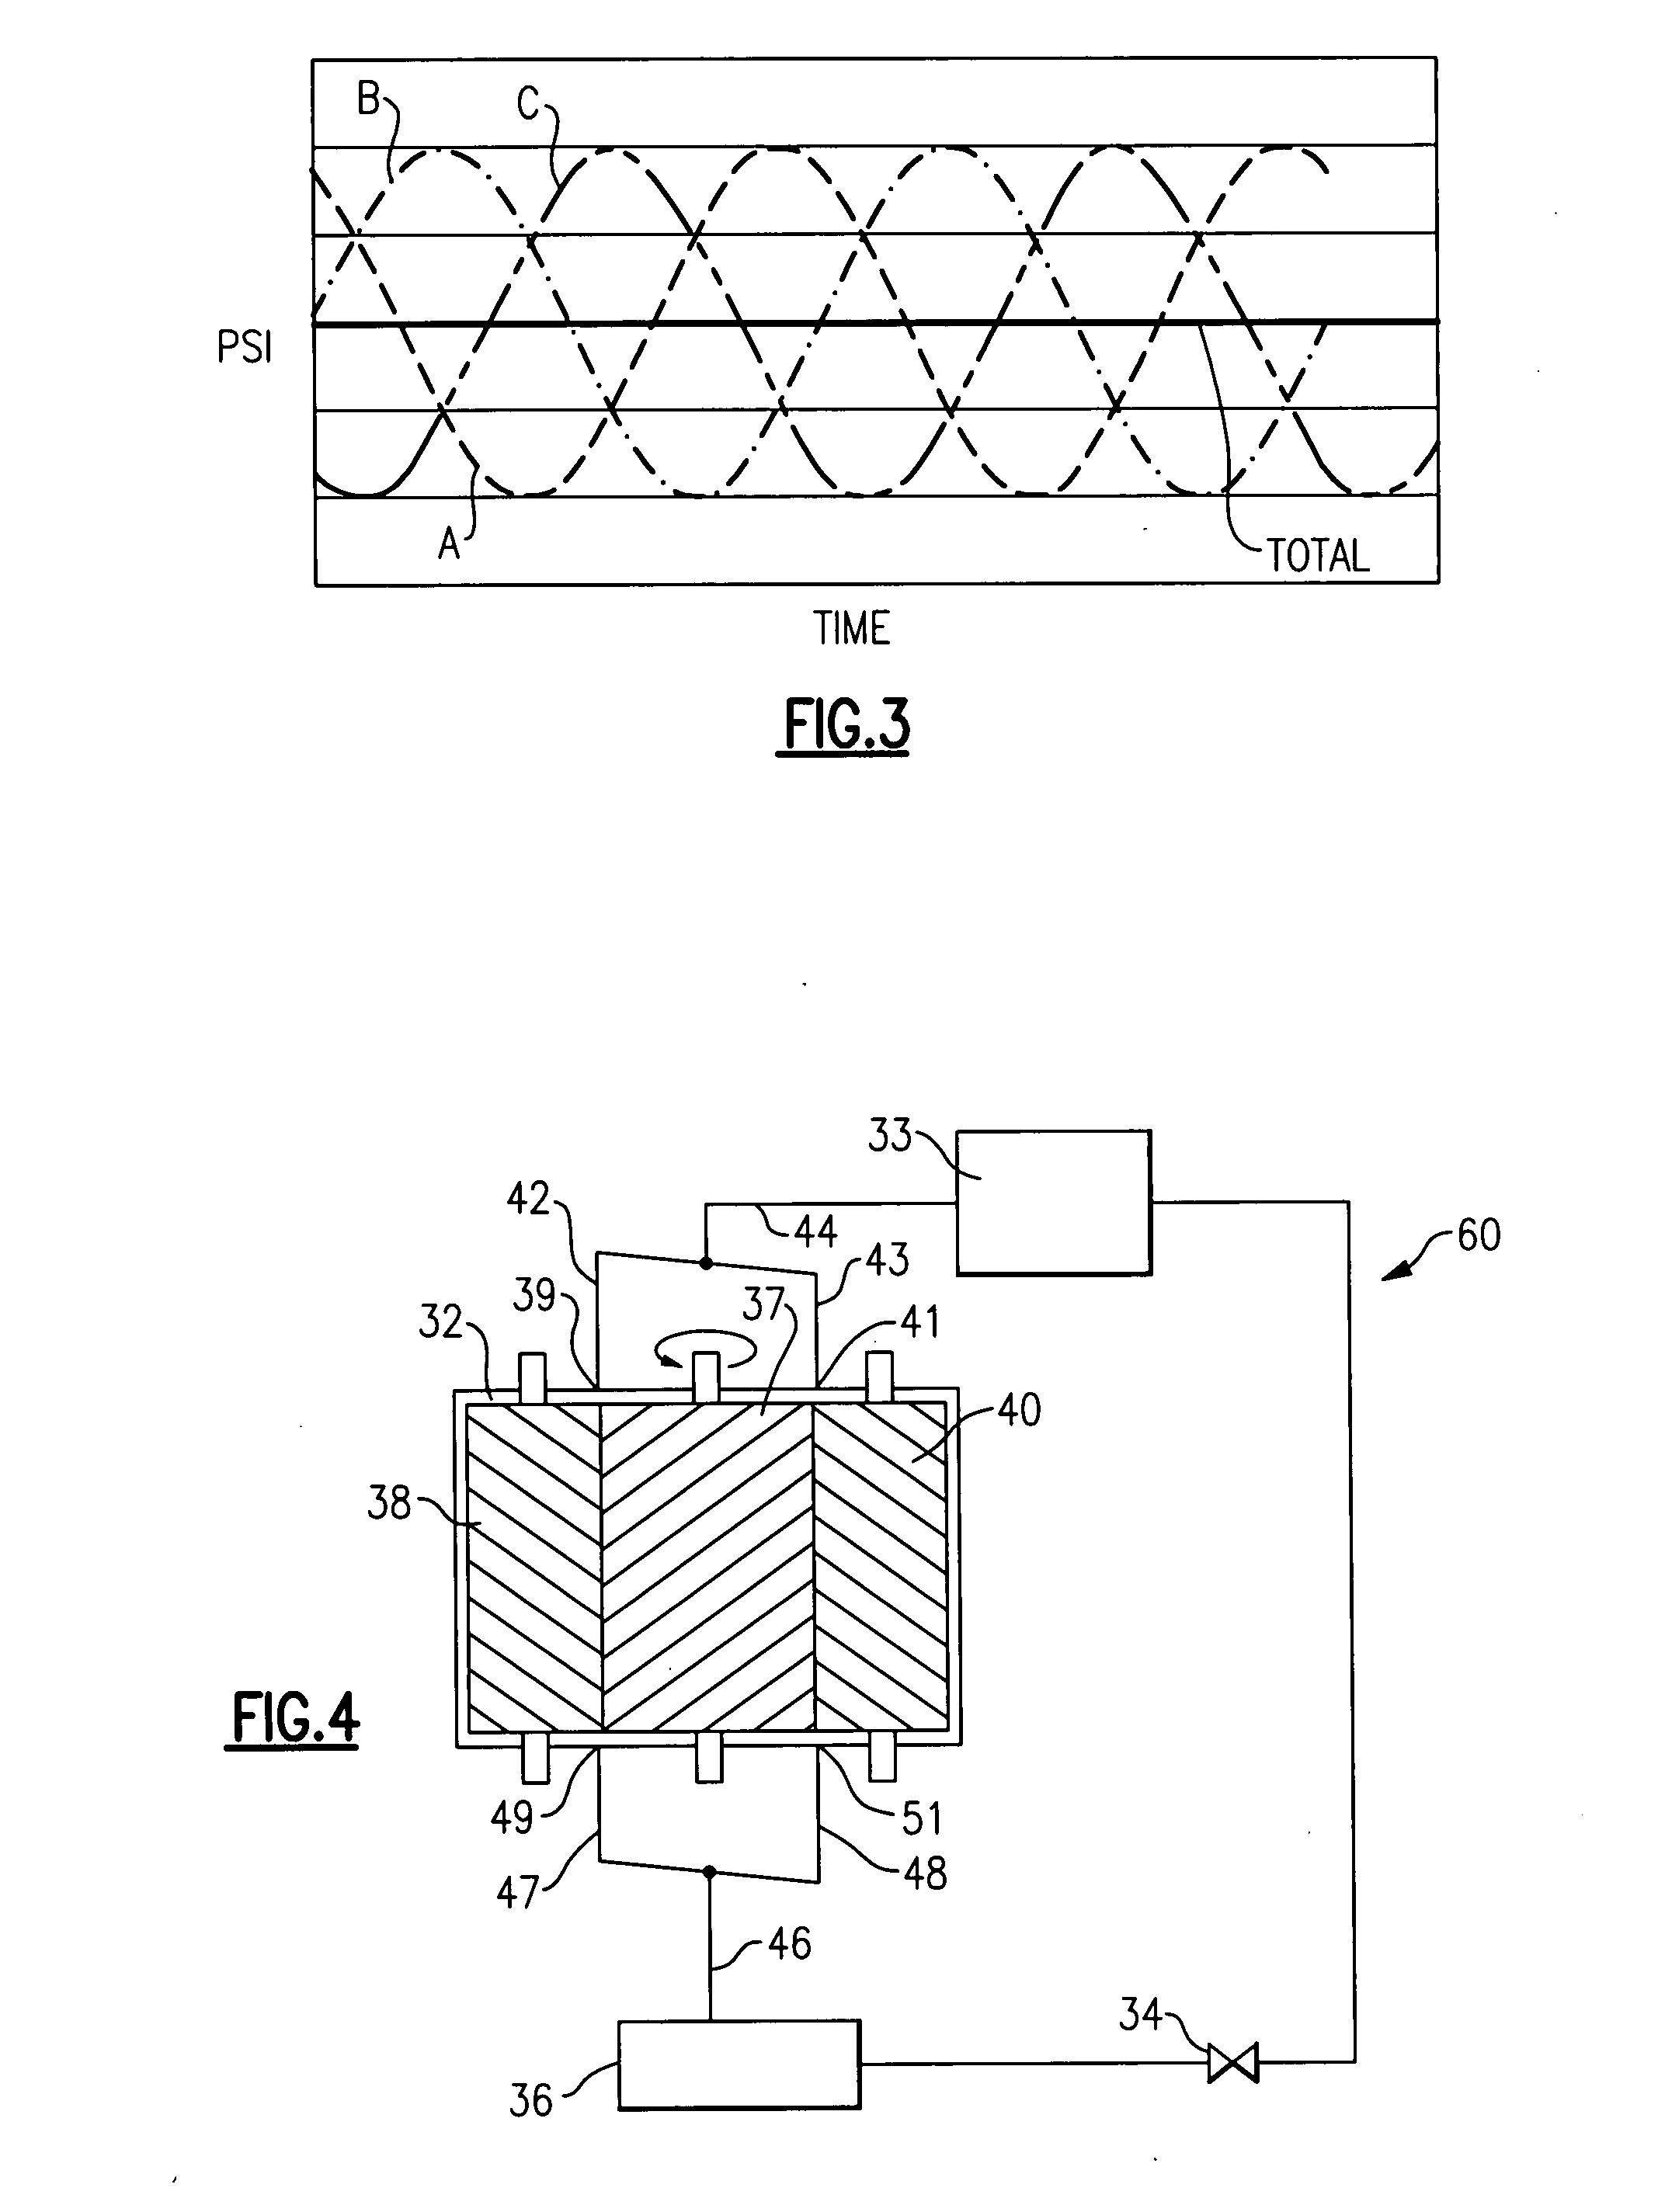 Pulsation attenuation in systems with multiple compression elements